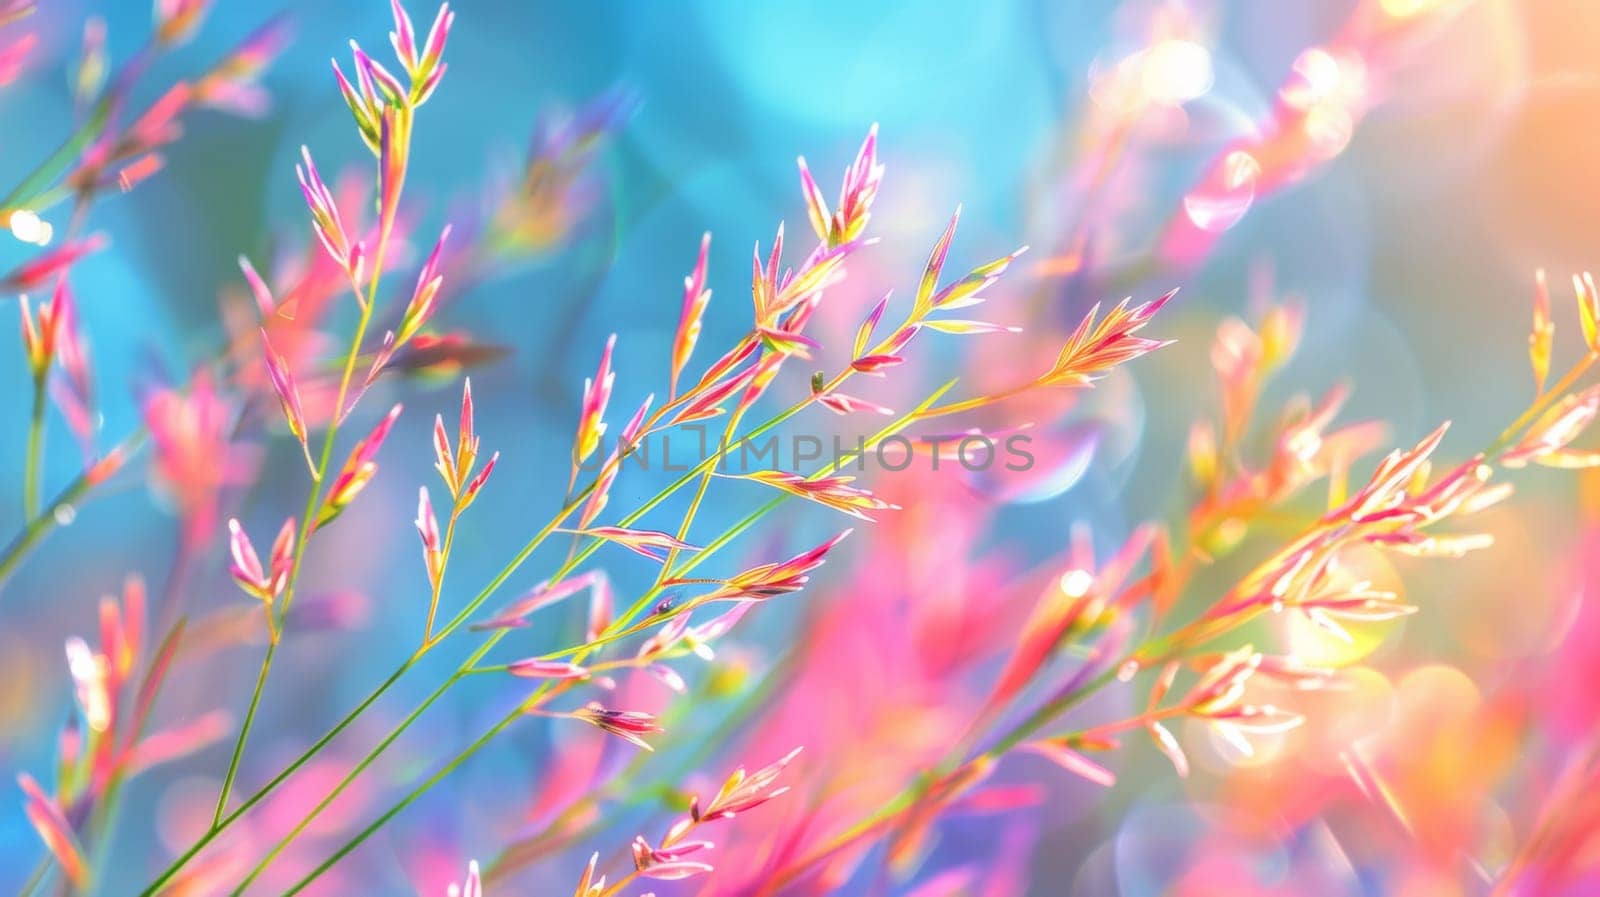 A close up of a bunch of pink flowers with some blue and yellow in the background